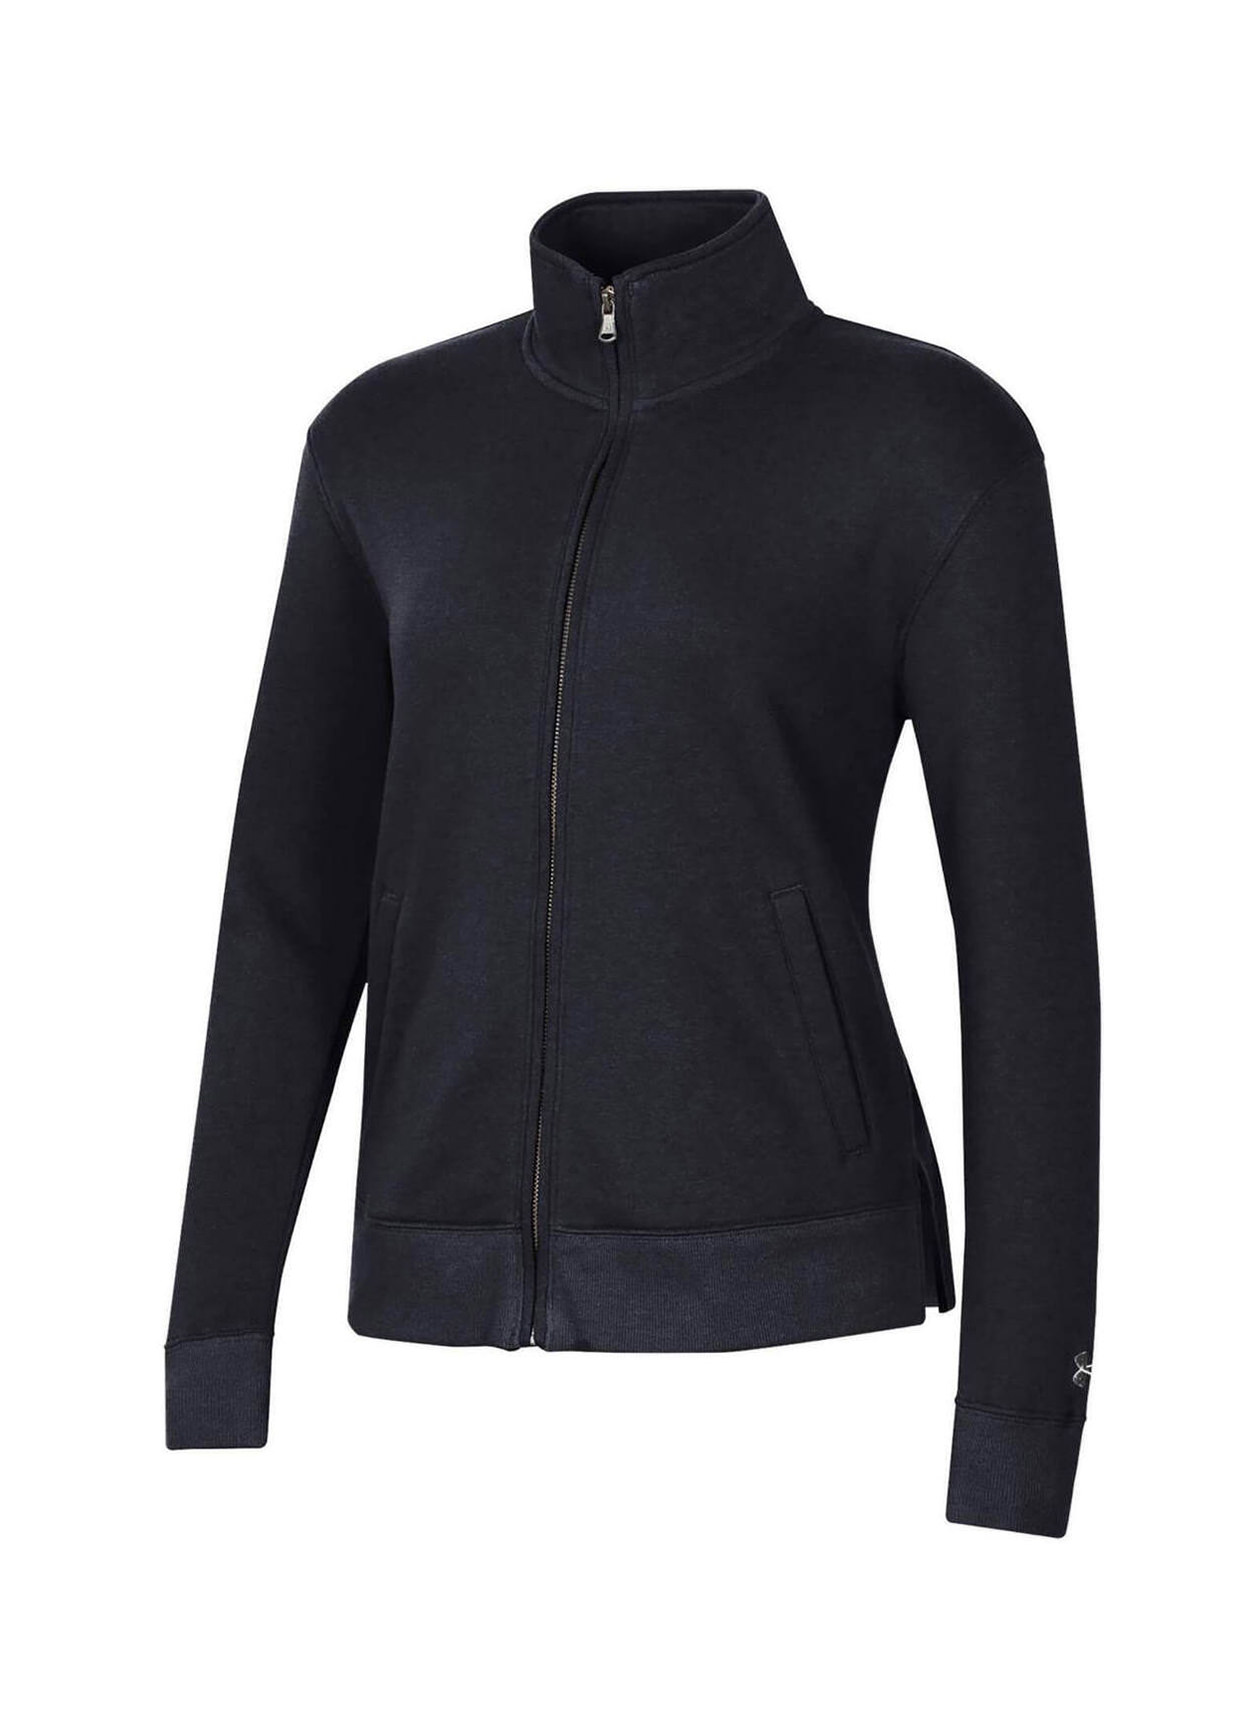 Custom Jackets  Corporate Under Armour Women's Black All Day